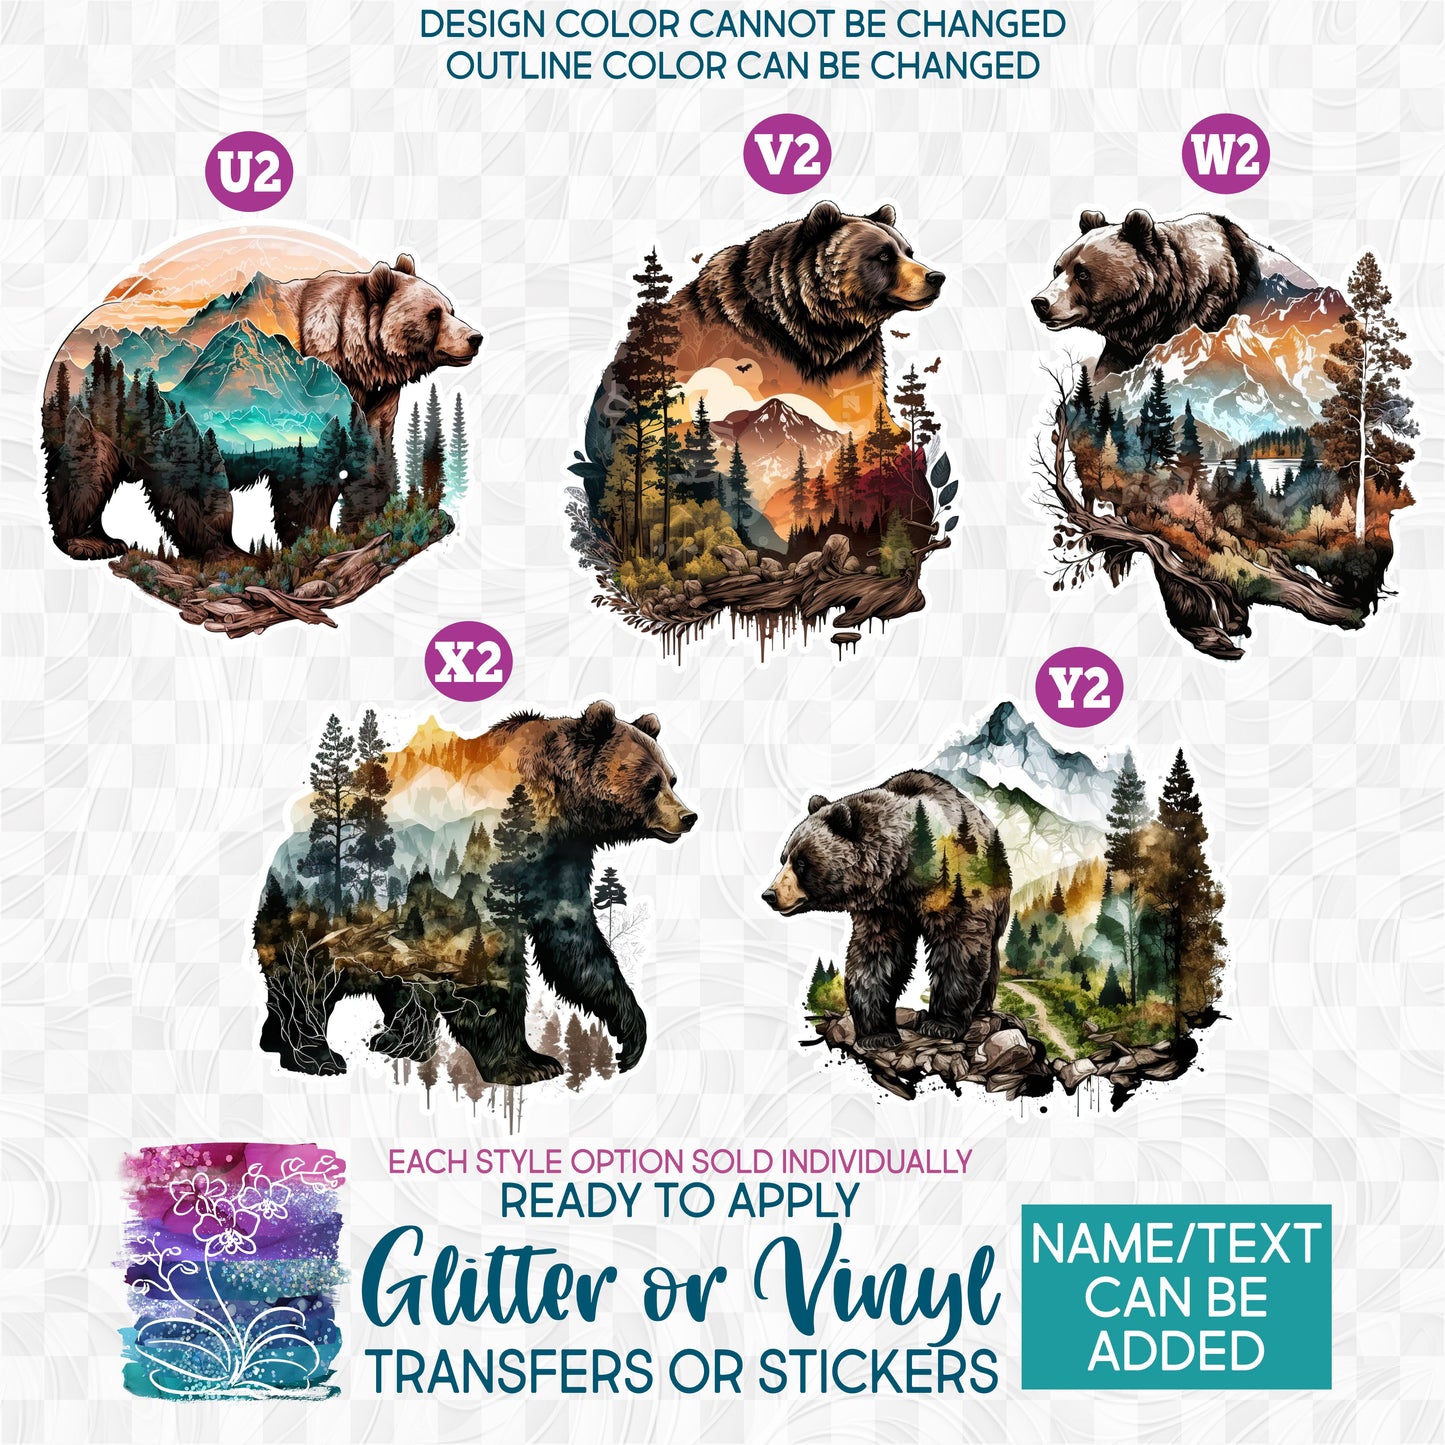 (s006-1) Watercolor Grizzly Kodiak Bear Bears Mountains Forest Glitter or Vinyl Iron-On Transfer or Sticker